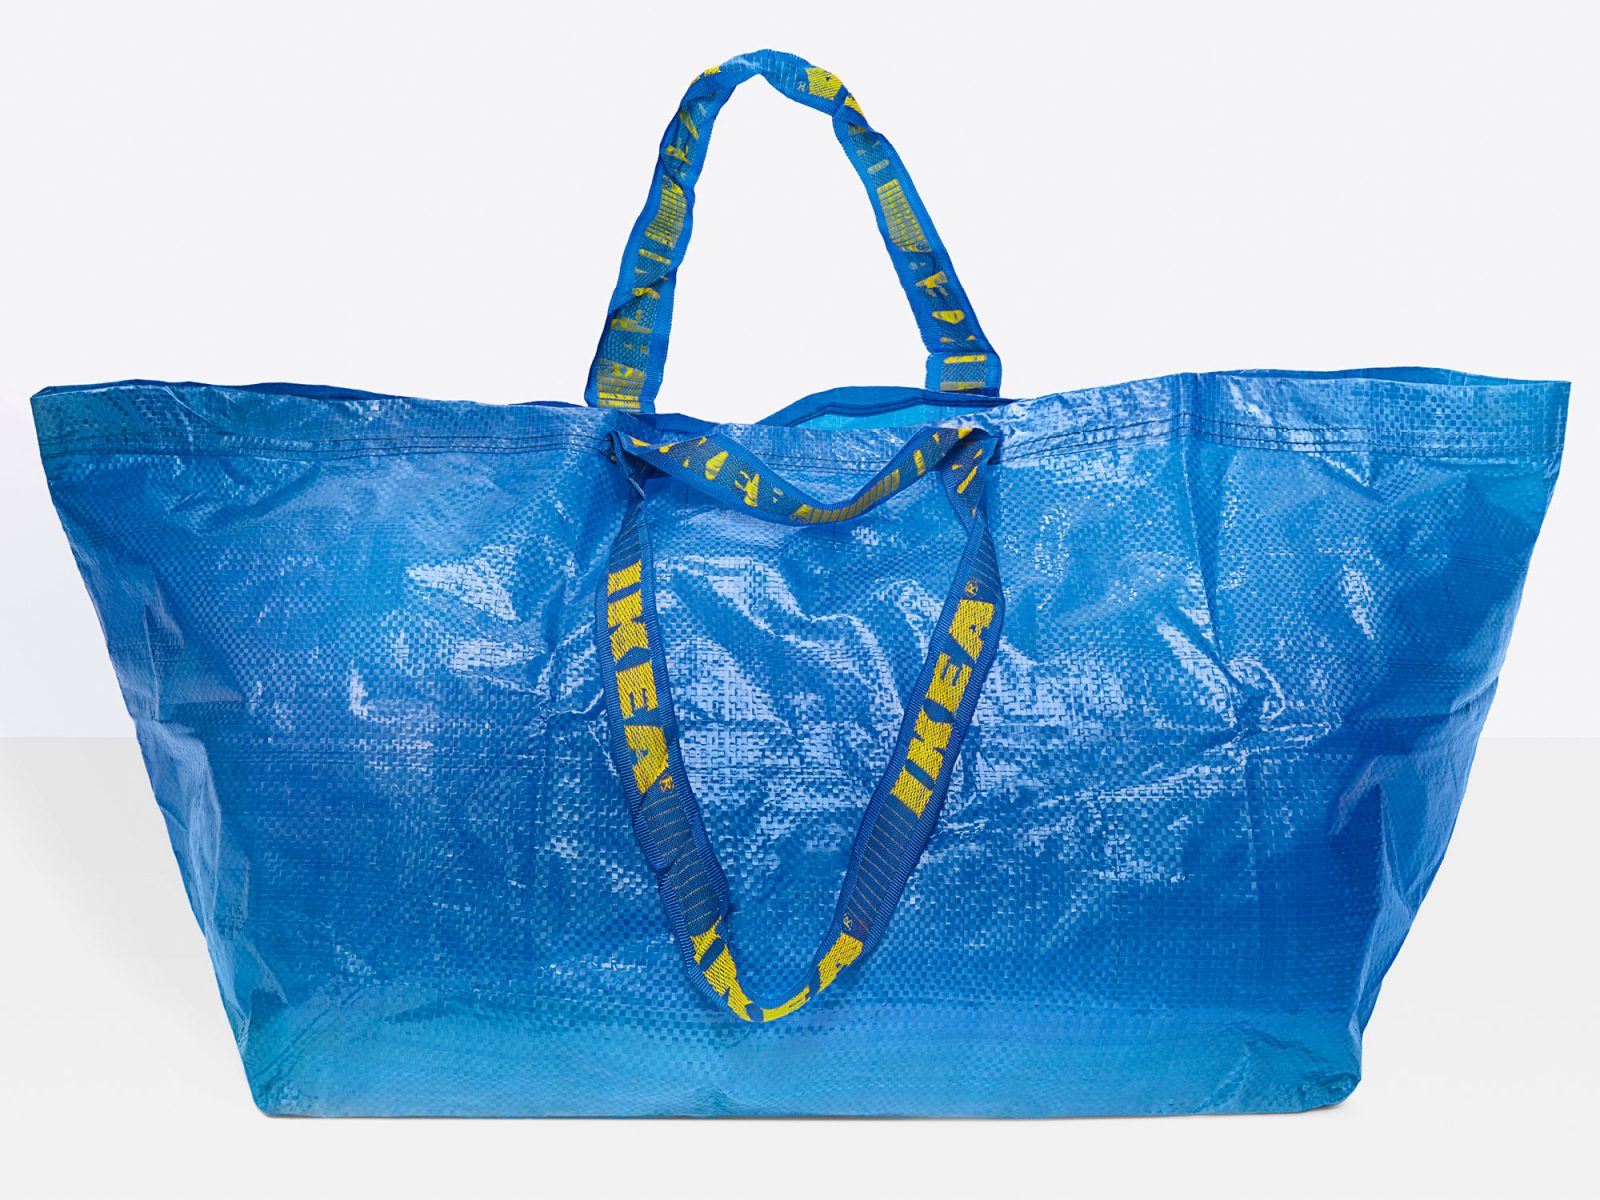 This airplane-shaped bag is selling for more than some actual